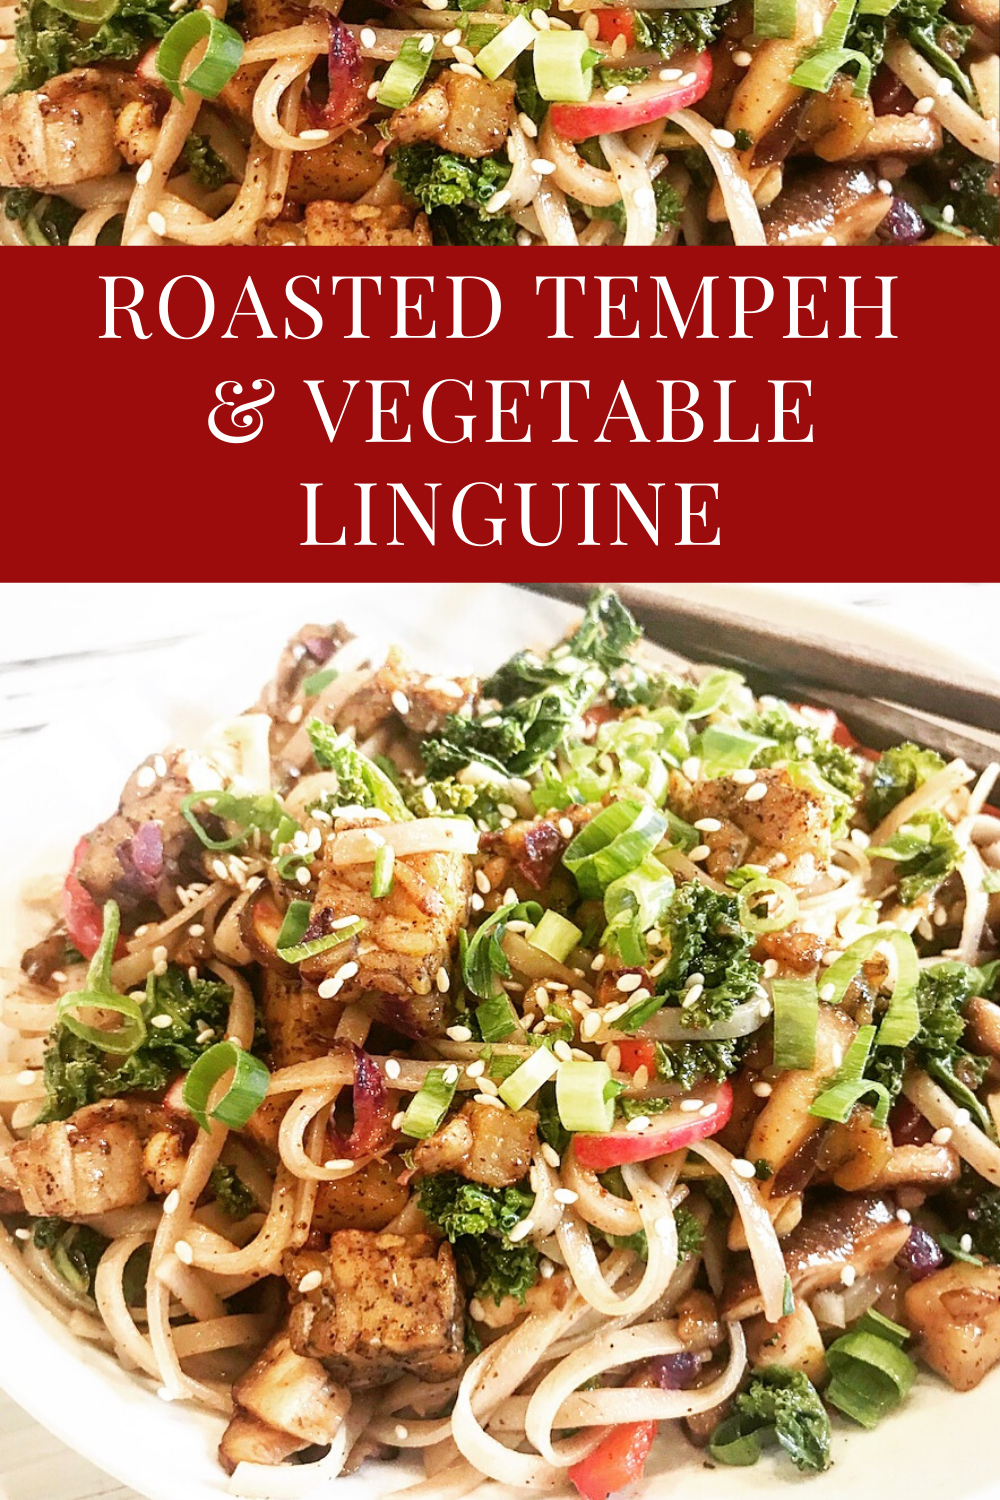 Roasted Tempeh & Vegetable Linguine Bowl - Roasted tempeh and turnips, shiitakes and red bell peppers, scallions, cabbage, kale, and radishes... all tossed together in a spicy sriracha hoisin sauce. via @thiswifecooks